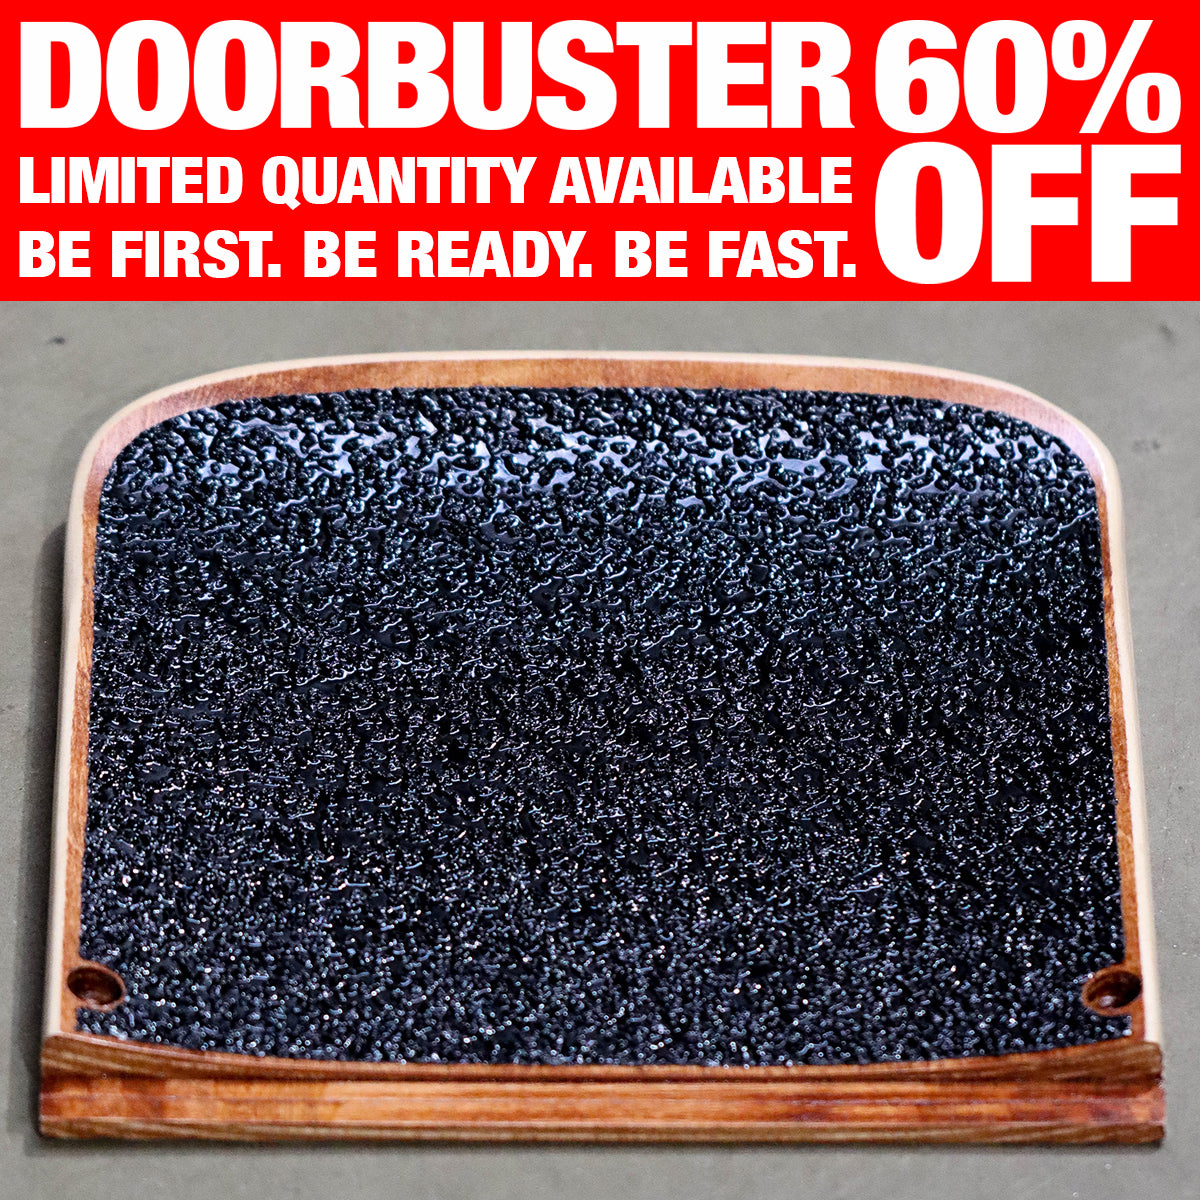 DOORBUSTER 60% 133 BE READY. BE FAST. LIMITED QUANTITY AVAILABLE BE FIRST. 